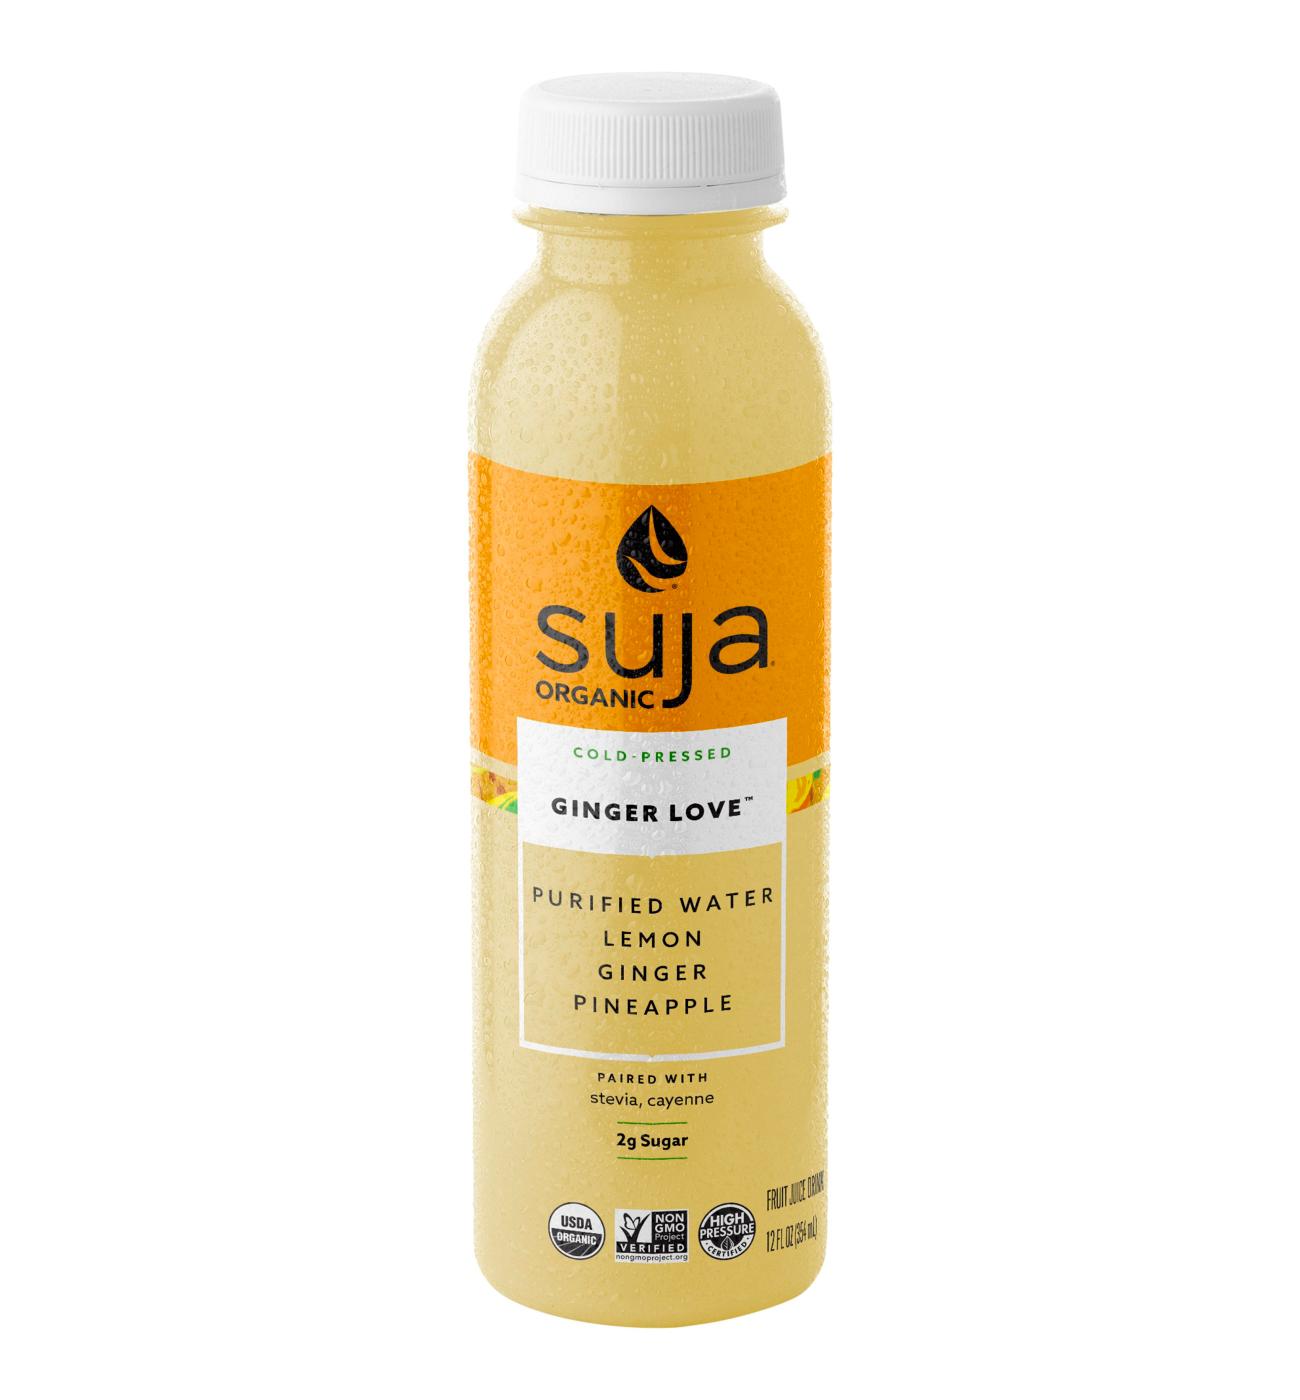 Suja Ginger Love Organic Cold-Pressed Juice; image 1 of 2